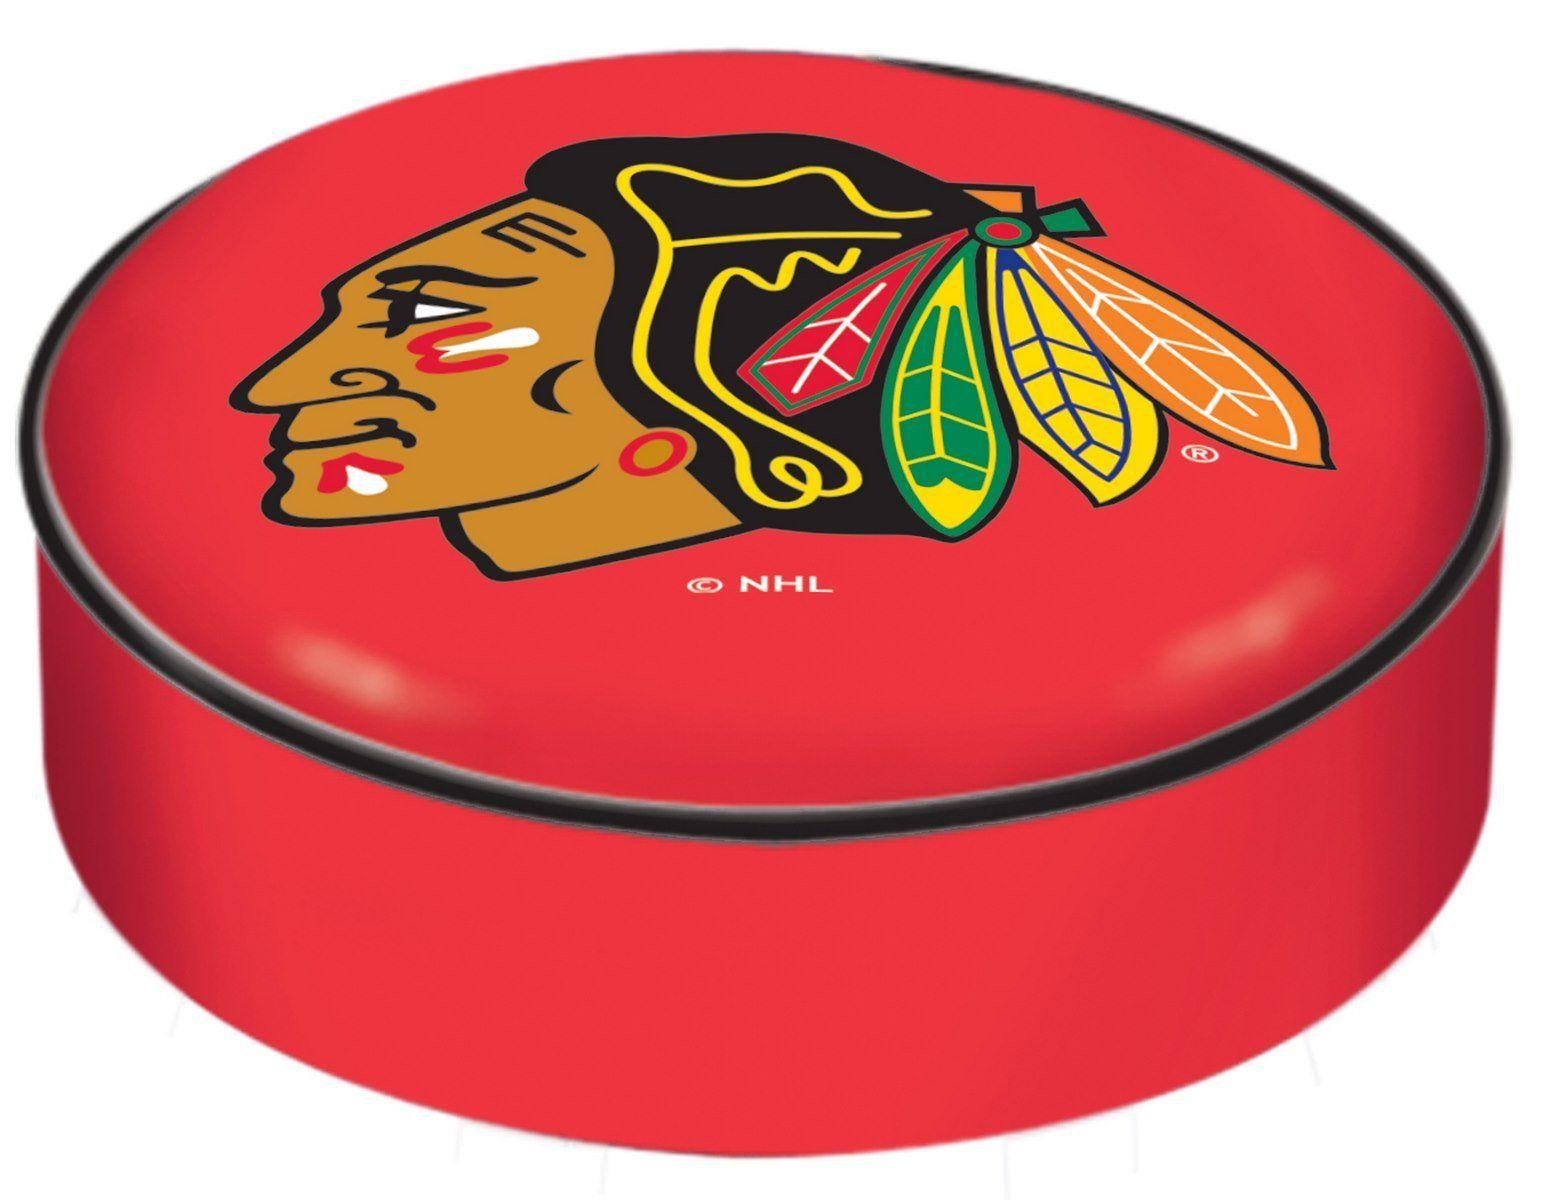 Black and Red Blackhawks Logo - Chicago Blackhawks Seat Cover - Red with Black Hawk Logo